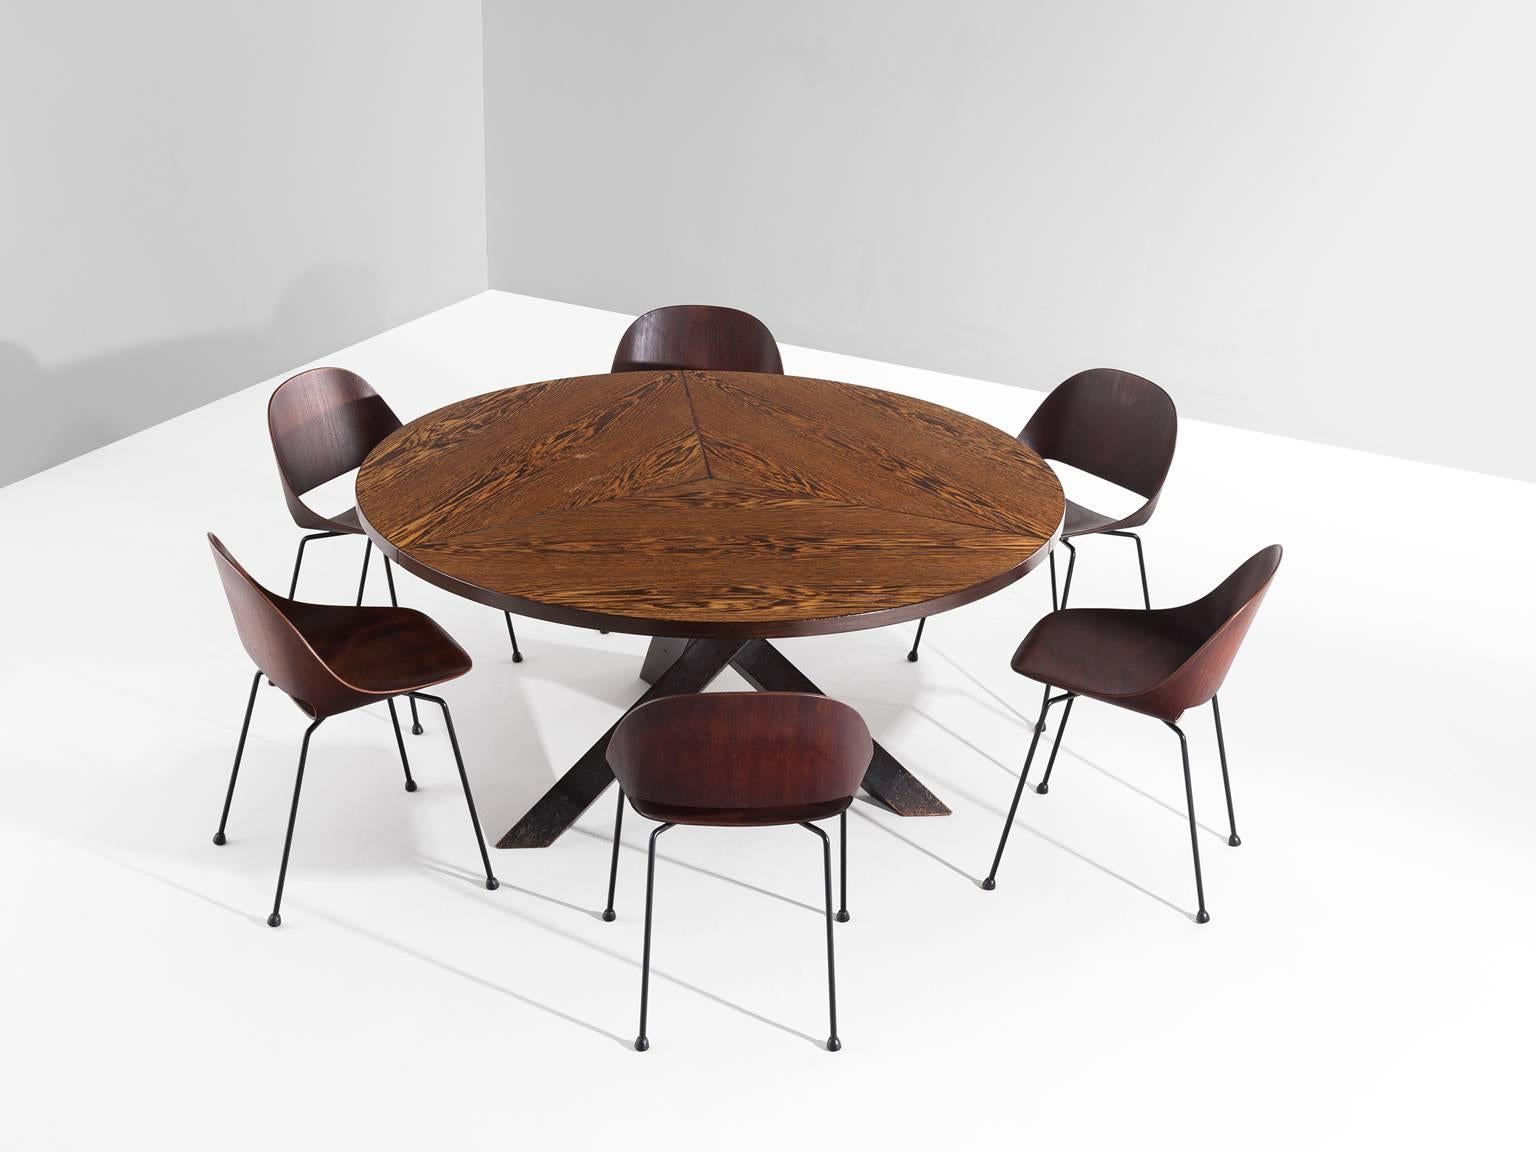 Dining table and six chairs, in wood and metal, by Martin Visser and Leon Stynen, the Netherlands and Belgium, 1960s.

Interesting dining set consisting of one round table and six chairs. The round table by Martin Visser has a wengé top and is